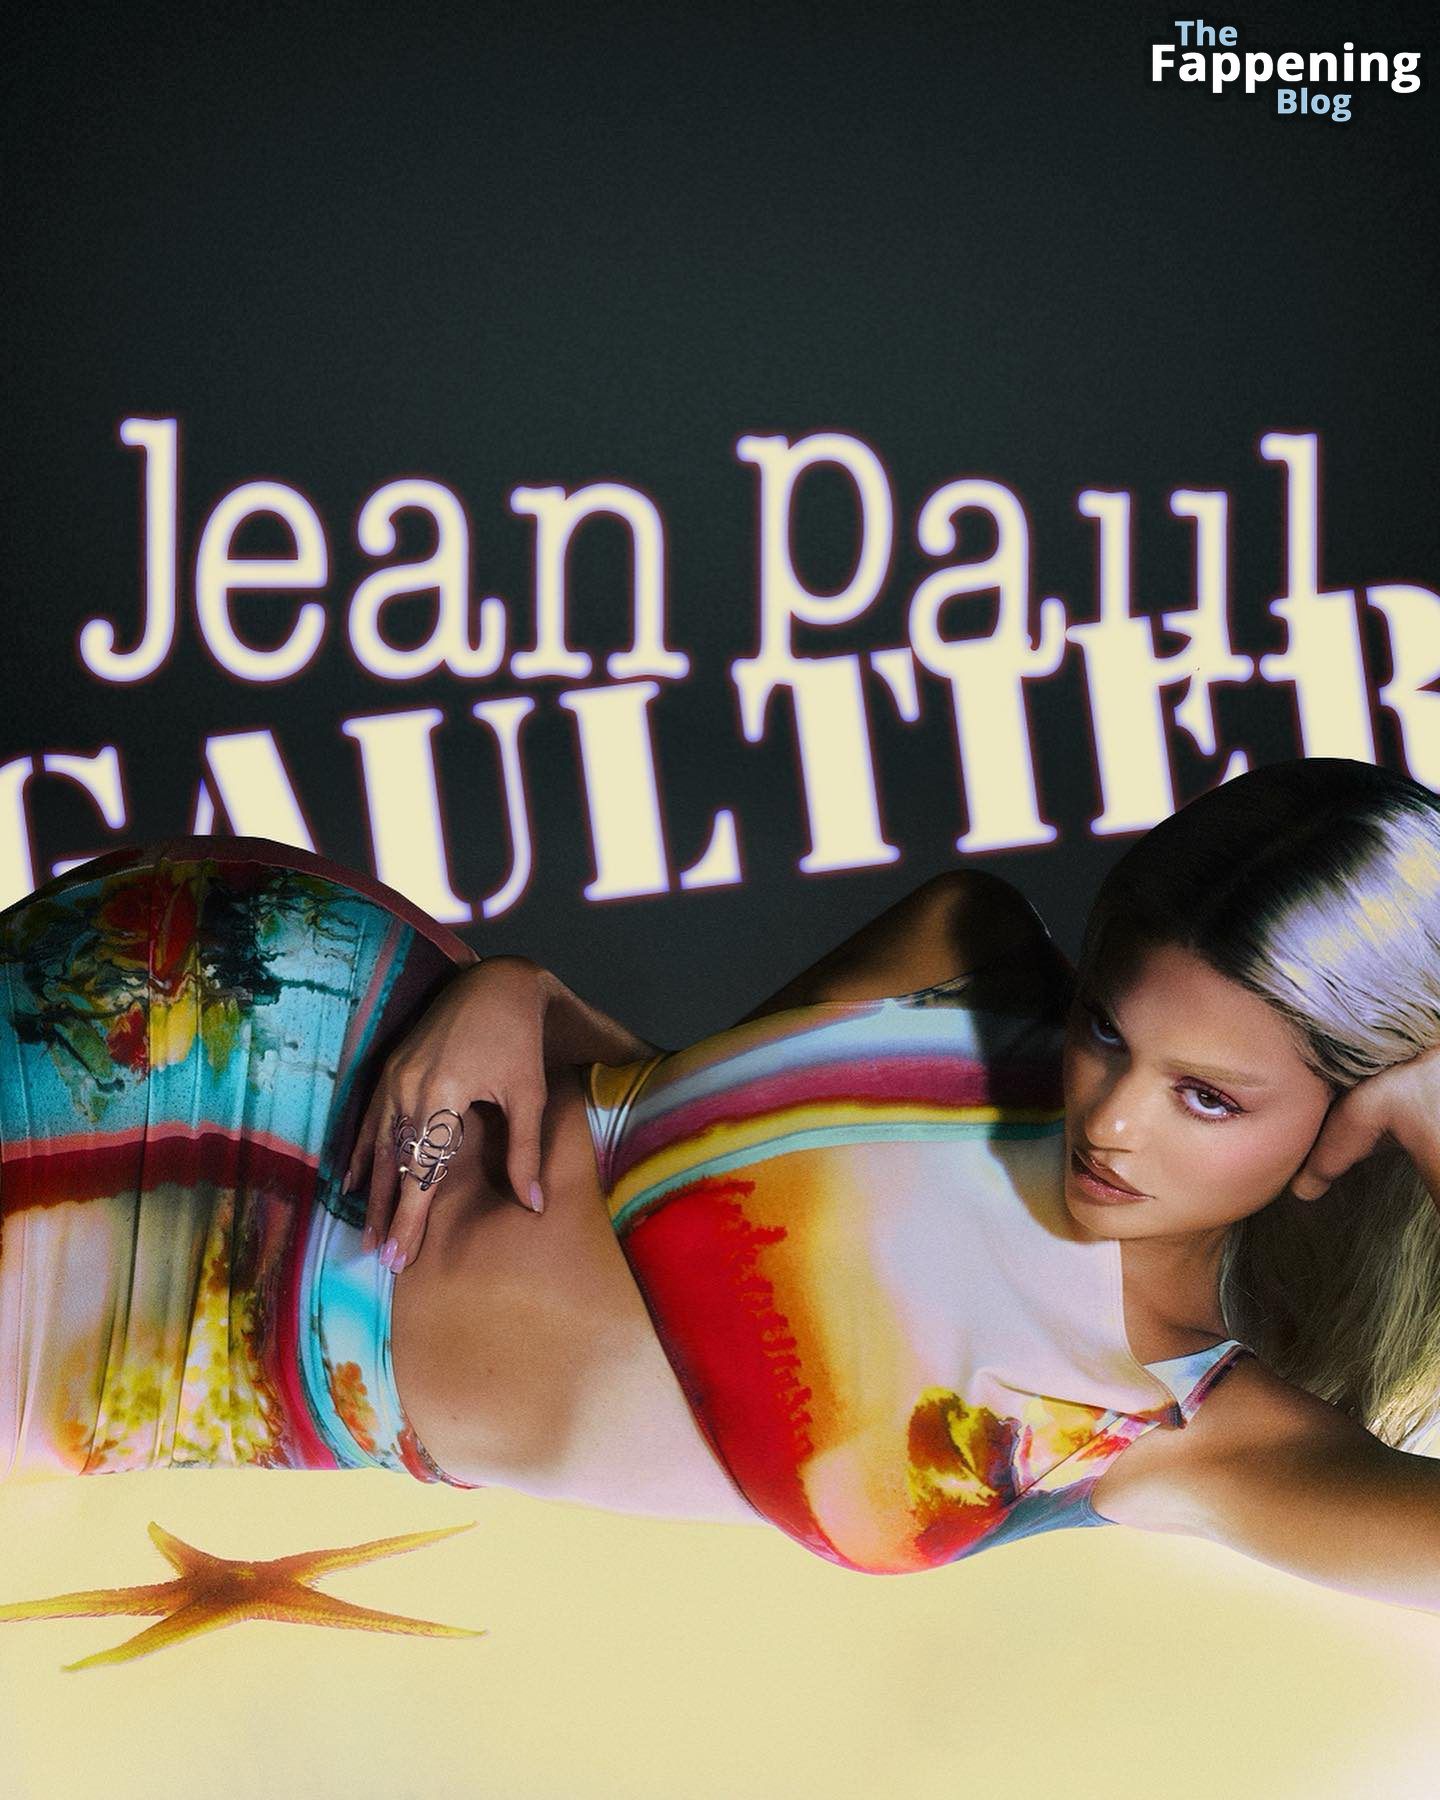 Kylie Jenner Poses for a New Jean Paul Gaultier Flowers Campaign (16 Photos)